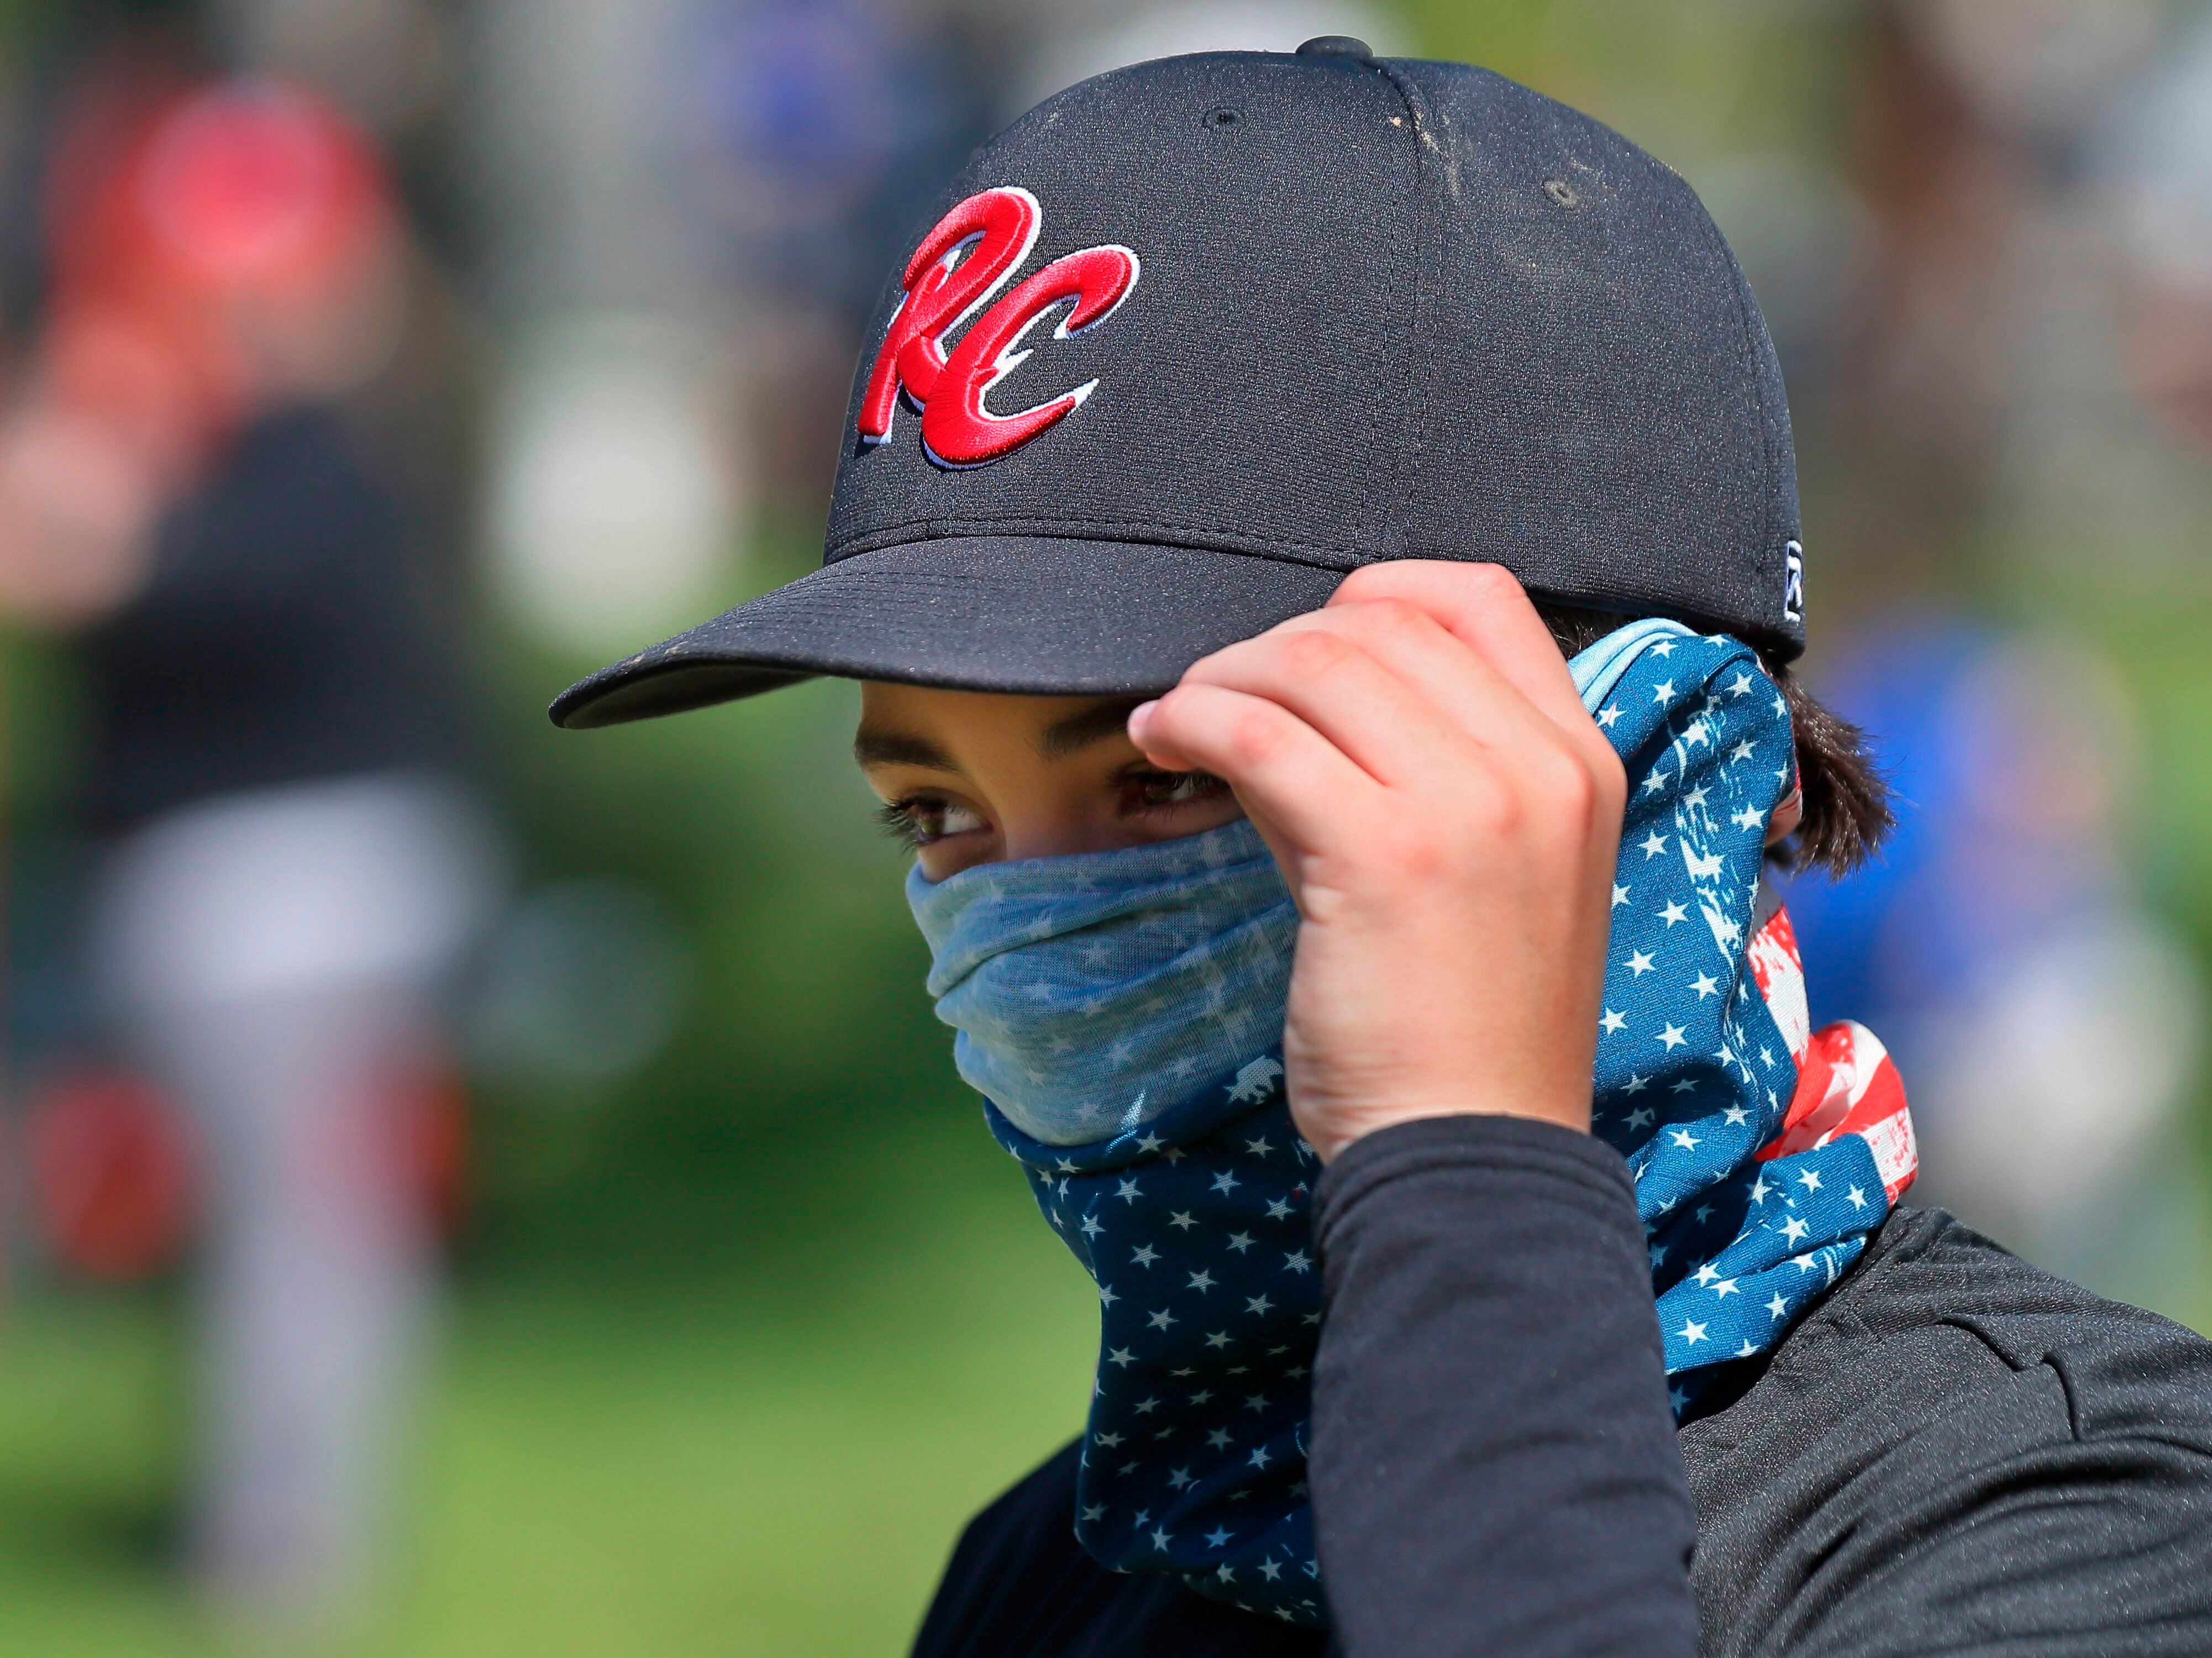 Masks in the dugout? Is Major League Baseball serious? Let's hope not.